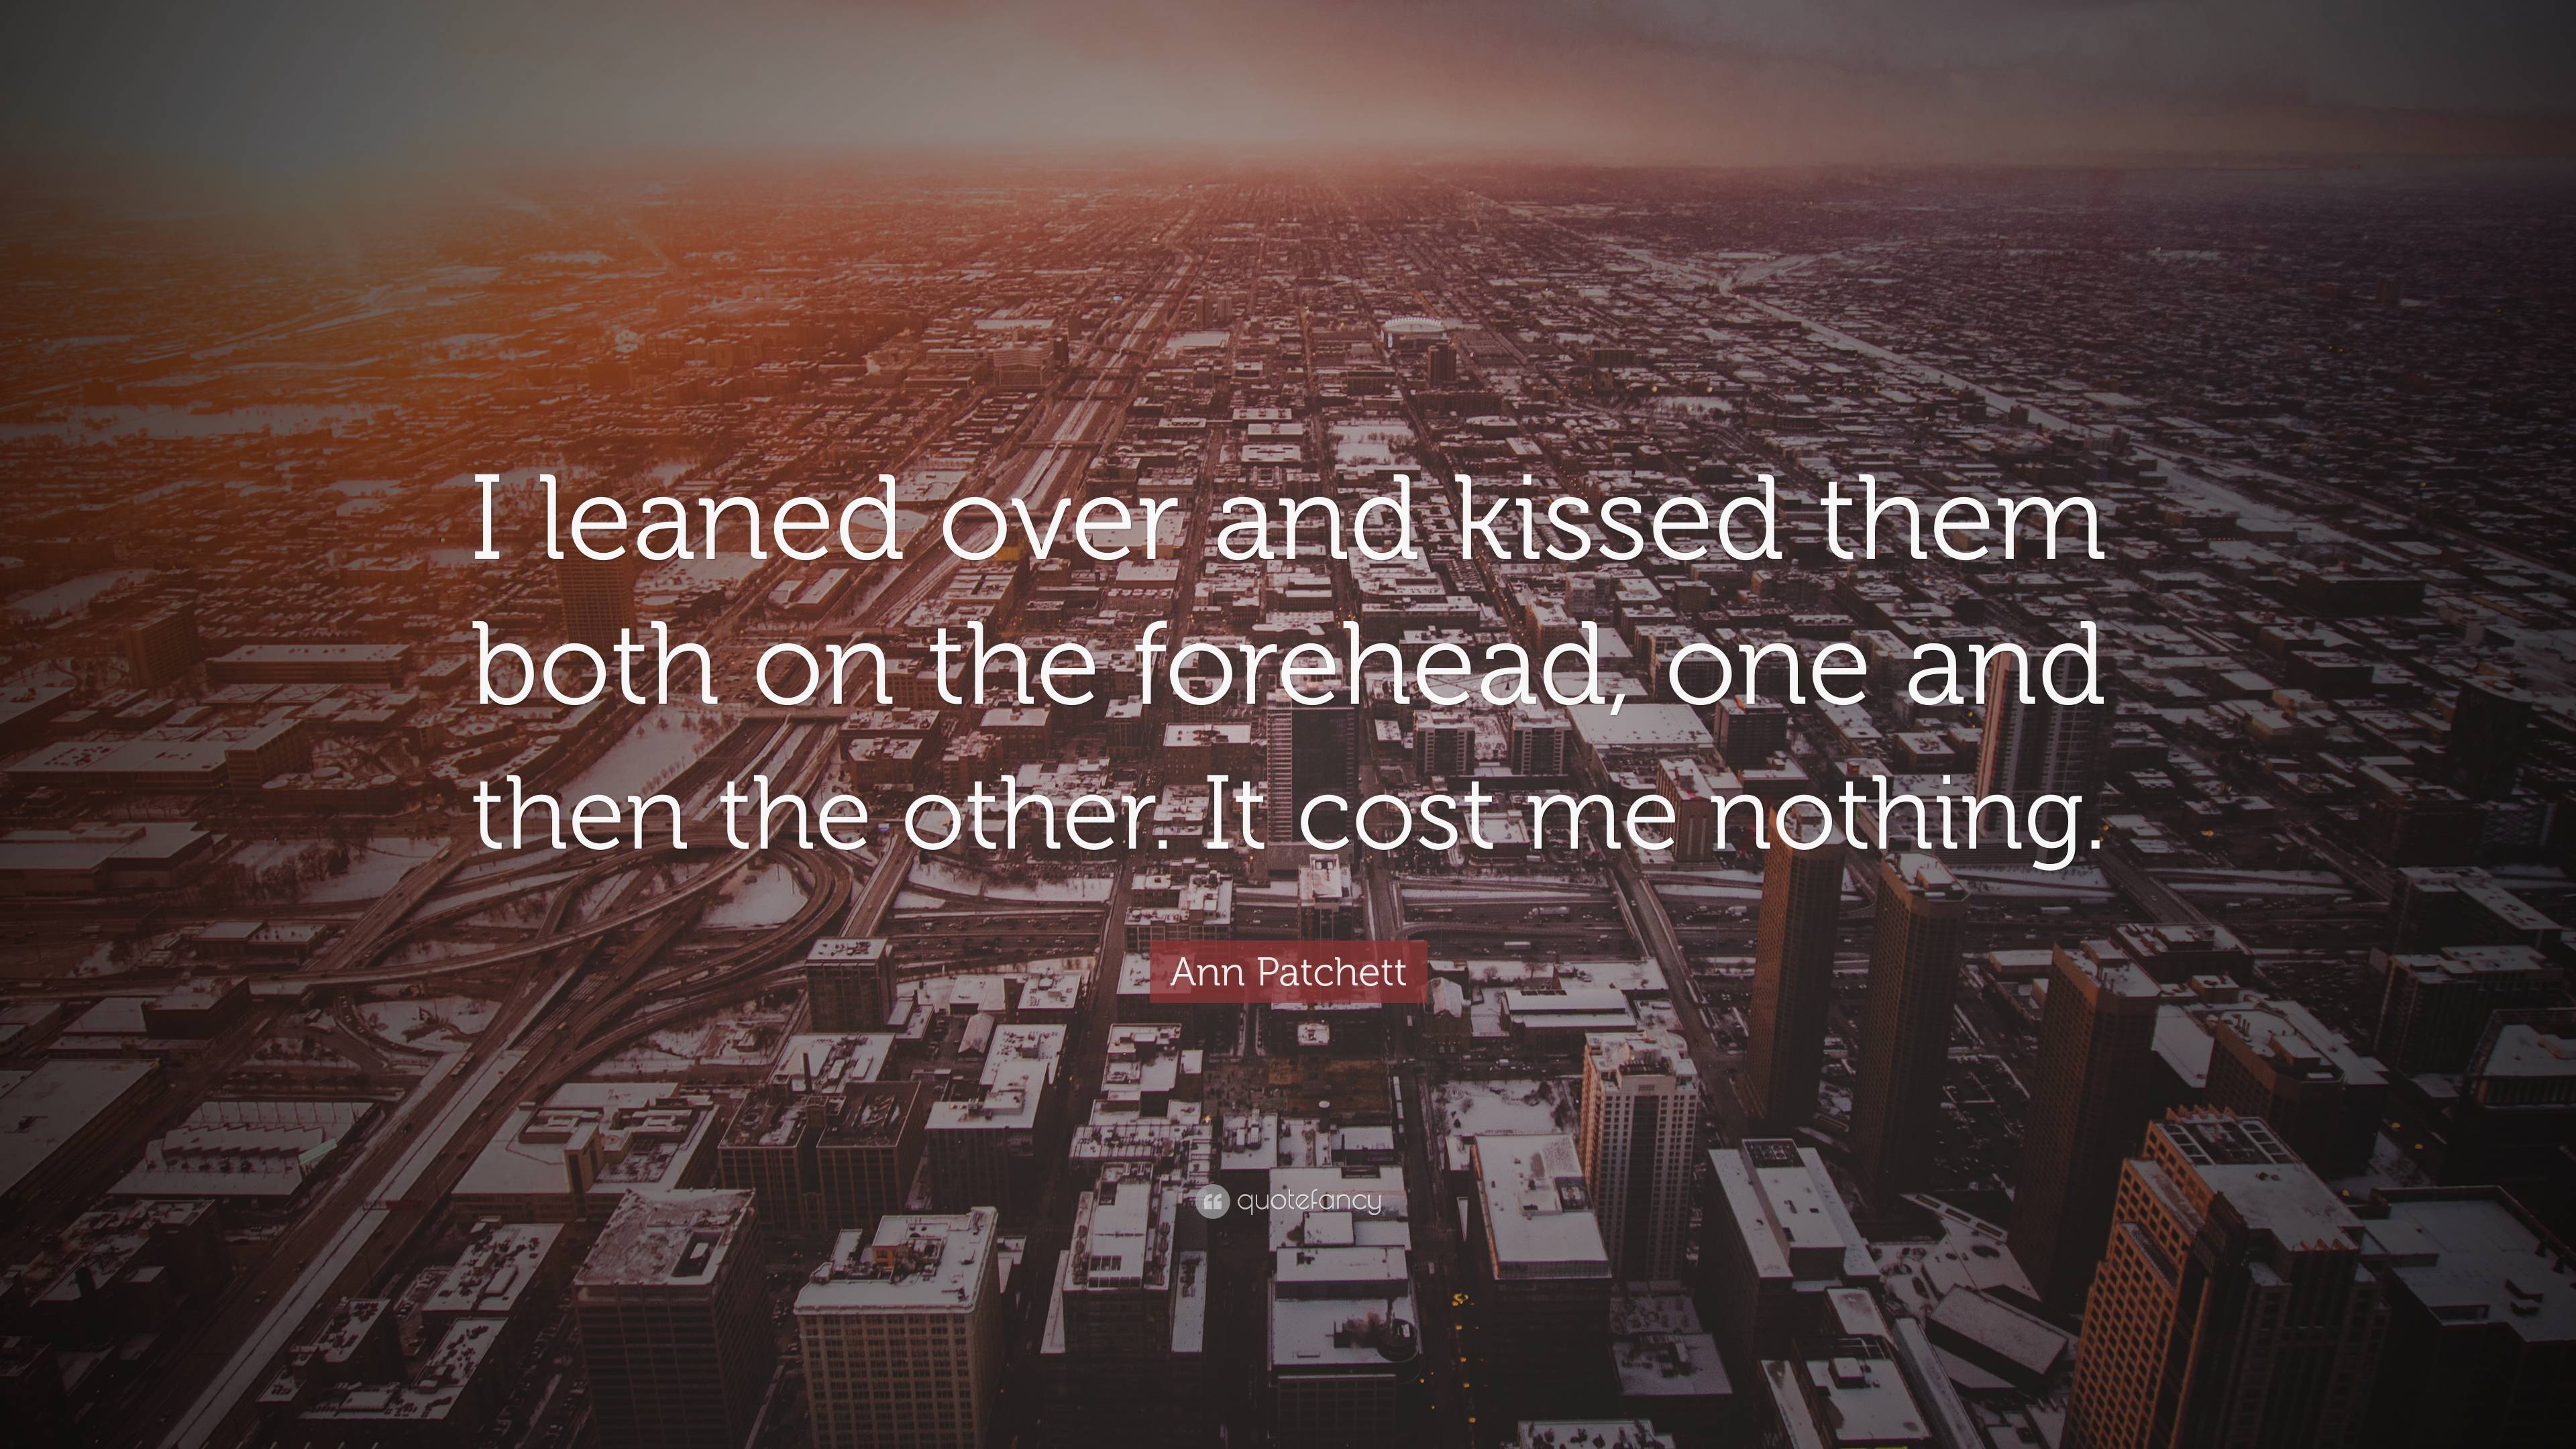 Ann Patchett Quote: “I leaned over and kissed them both on the forehead ...